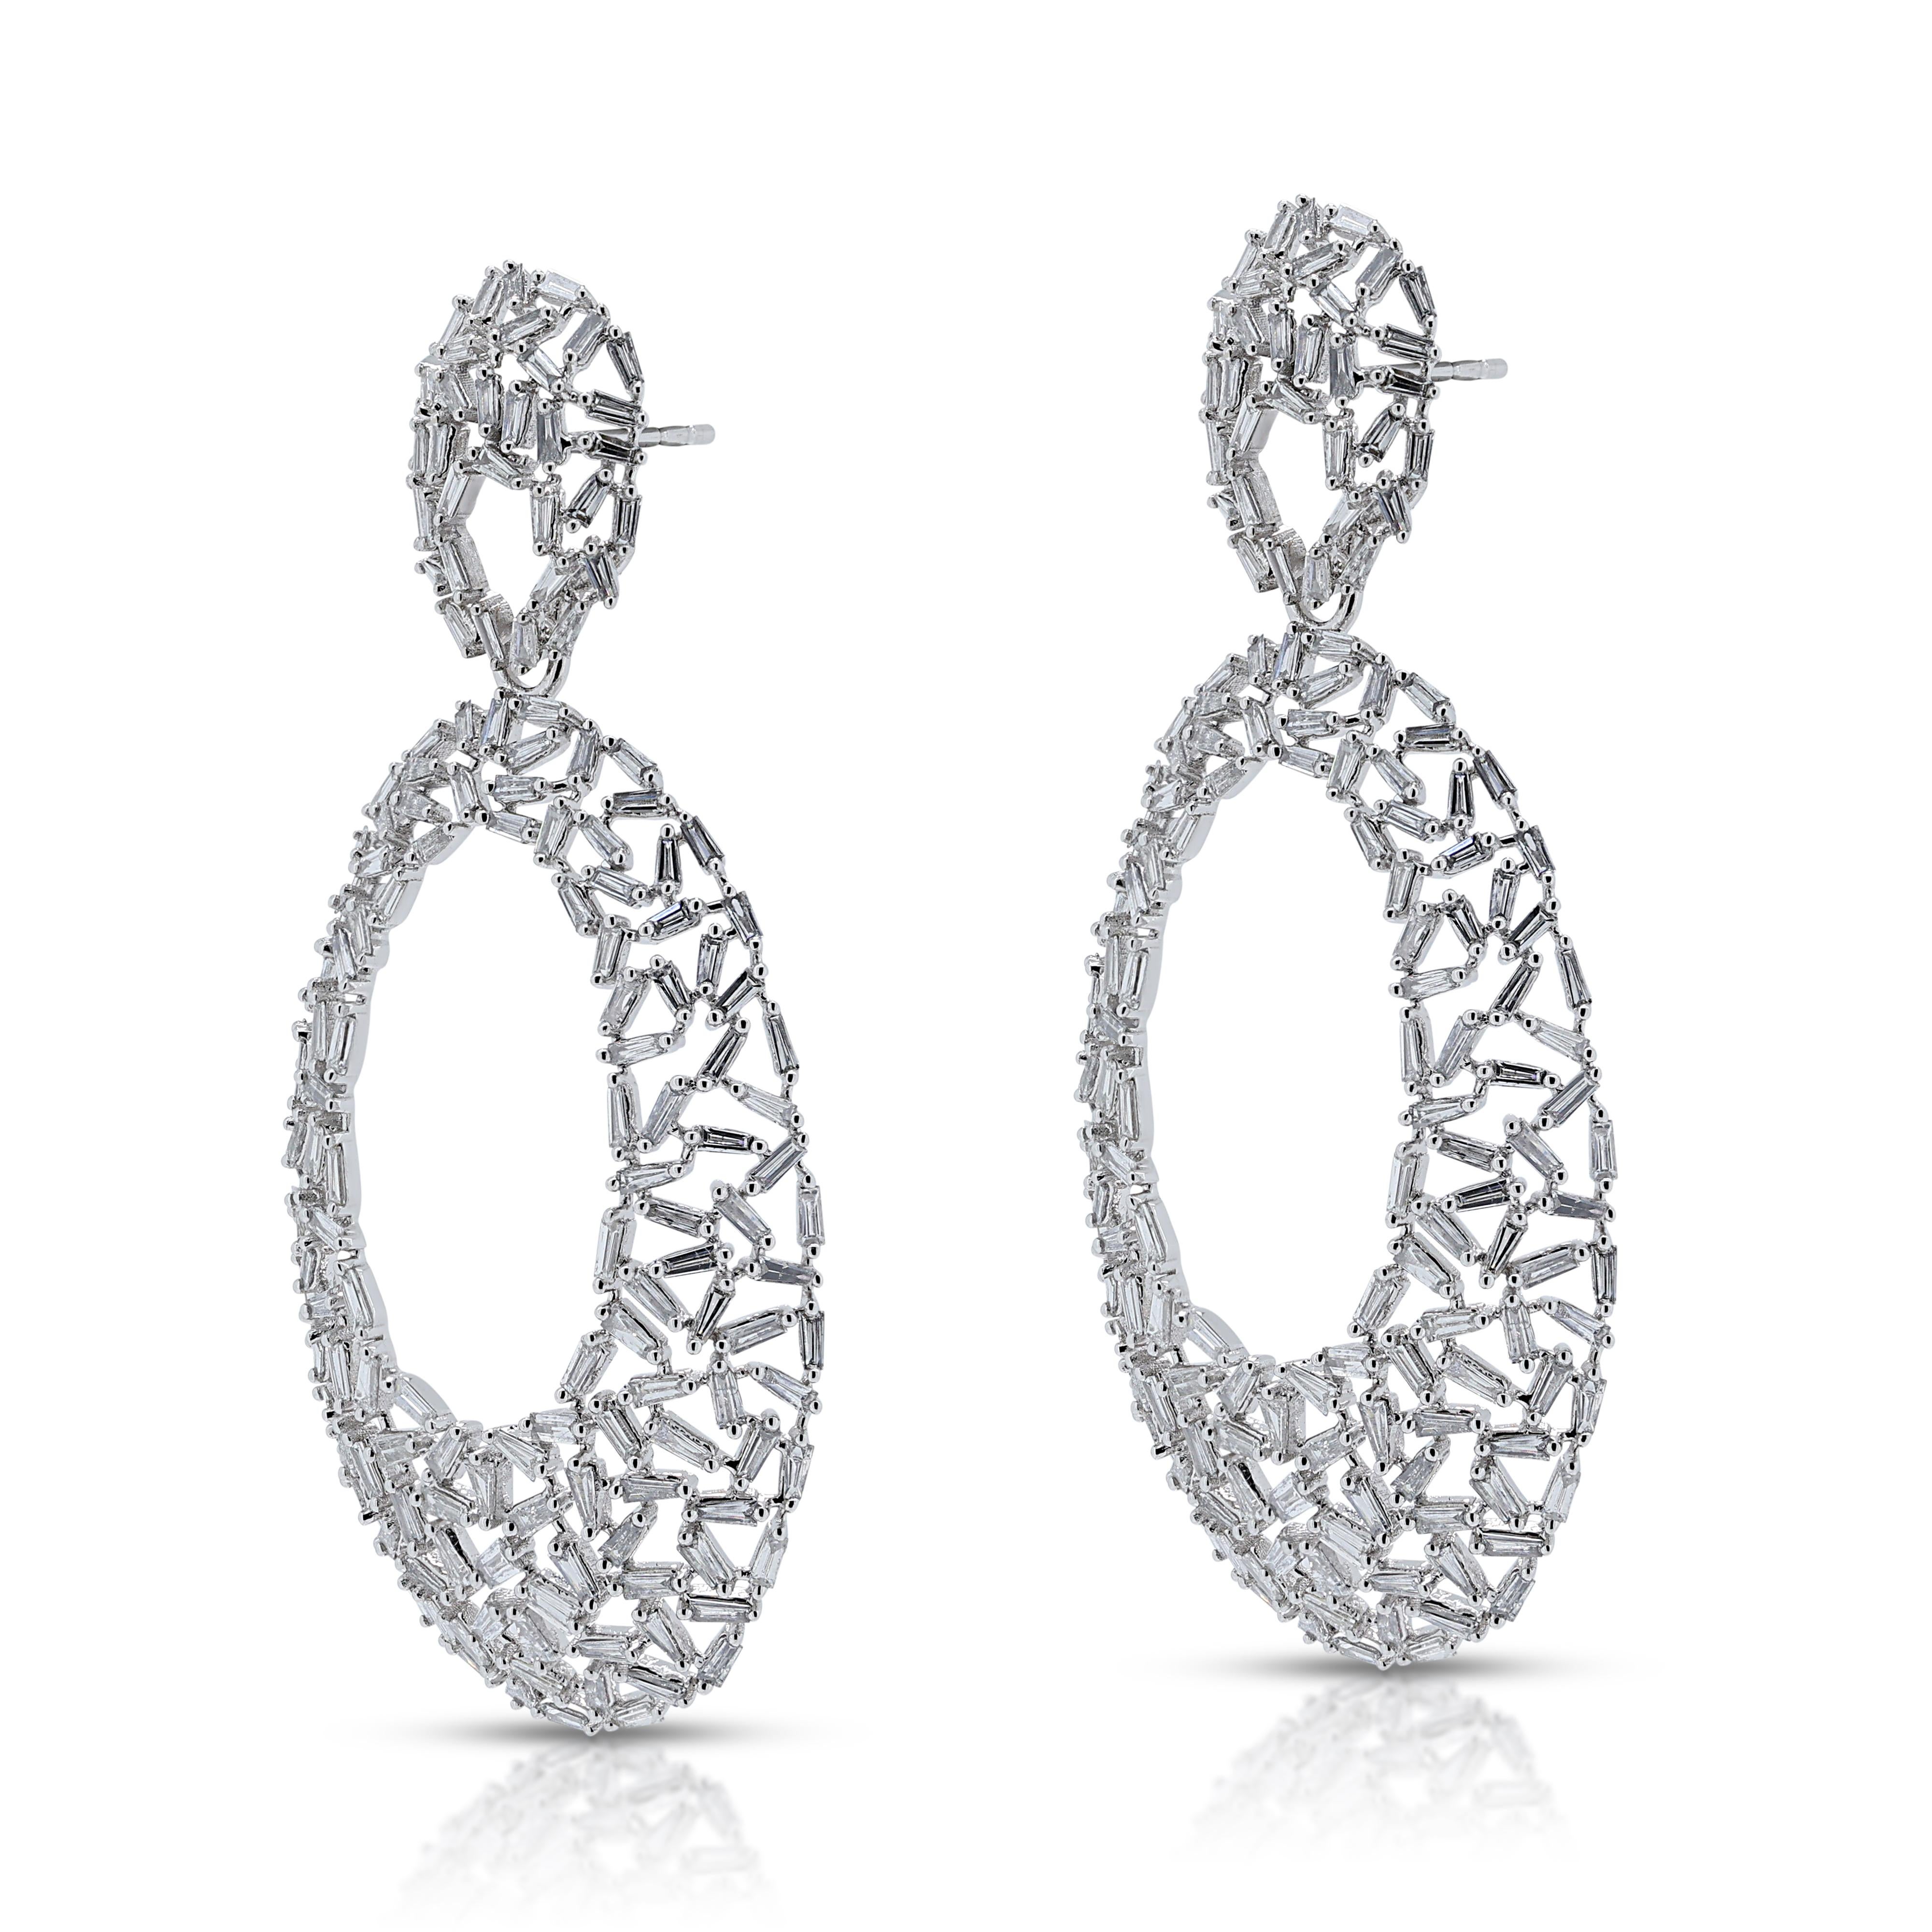 Fabulous 3.26ct Diamonds Drop Earrings in 18K White Gold In New Condition For Sale In רמת גן, IL